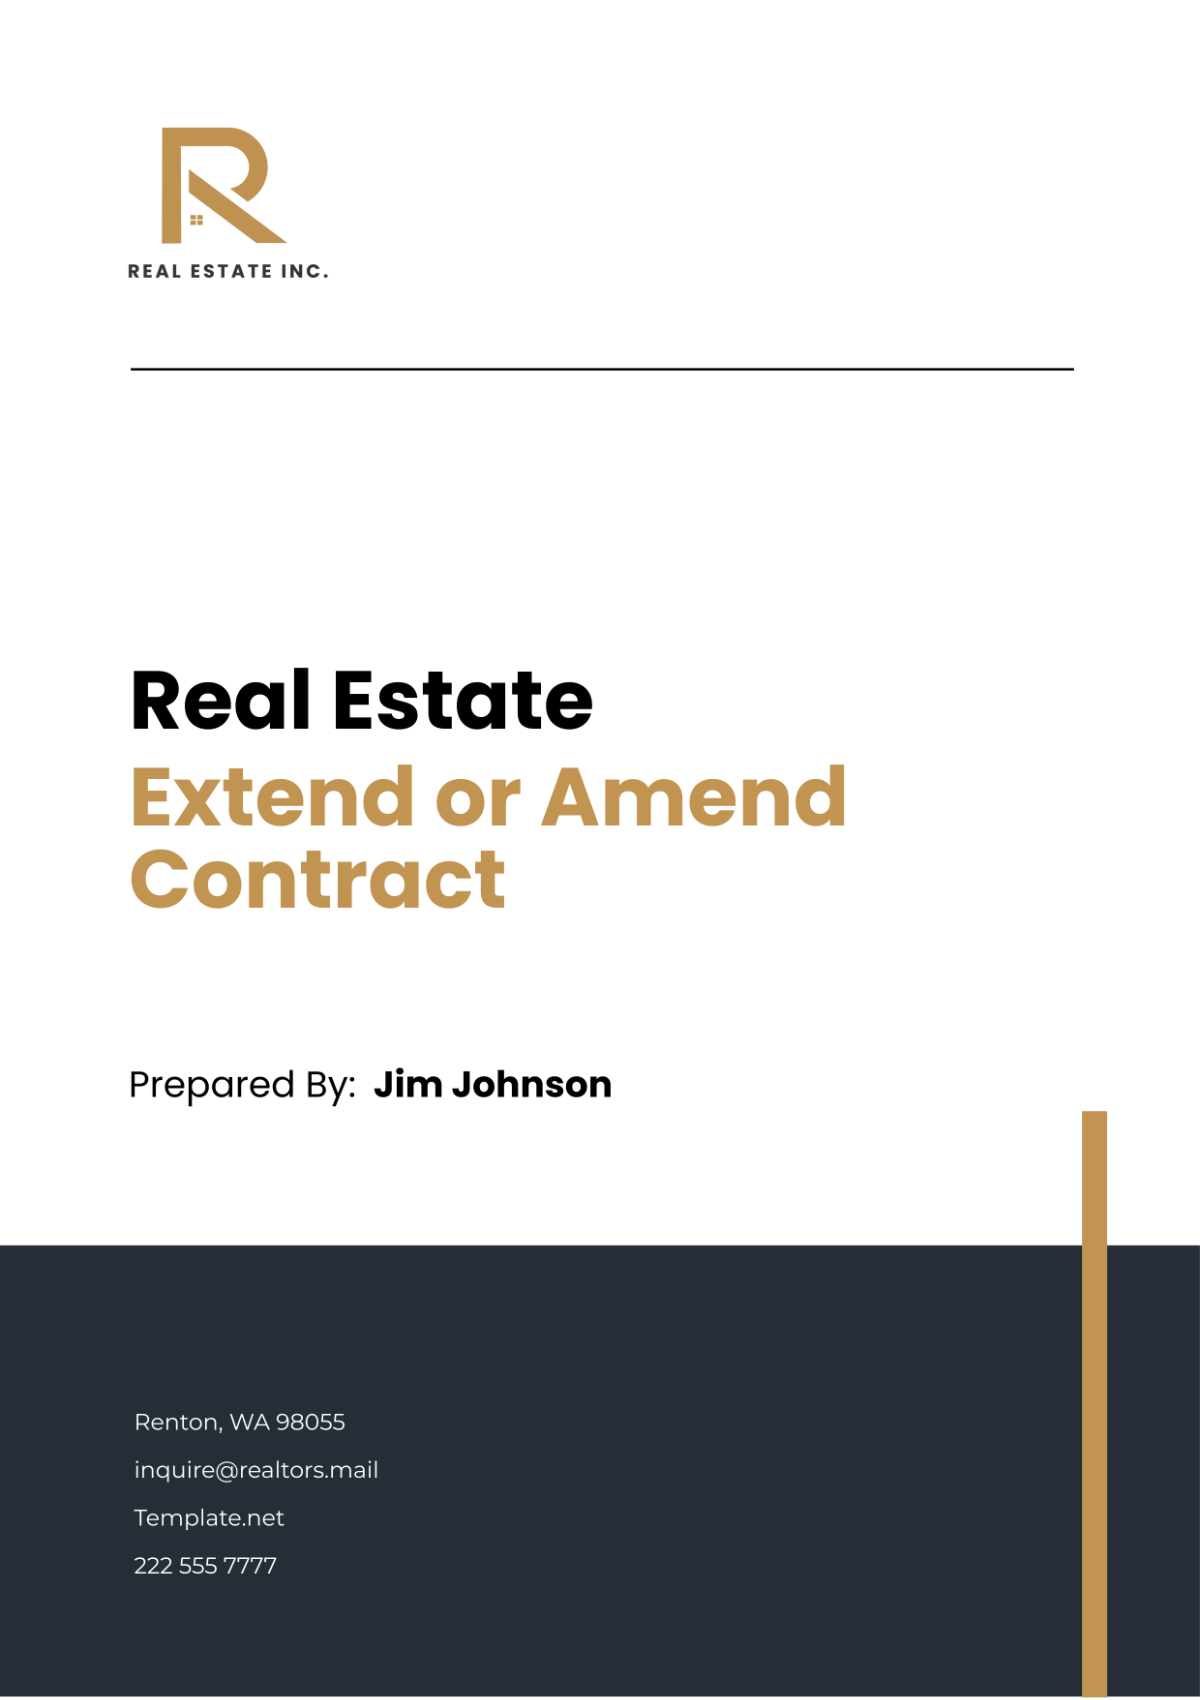 Real Estate Extend or Amend Contract Template